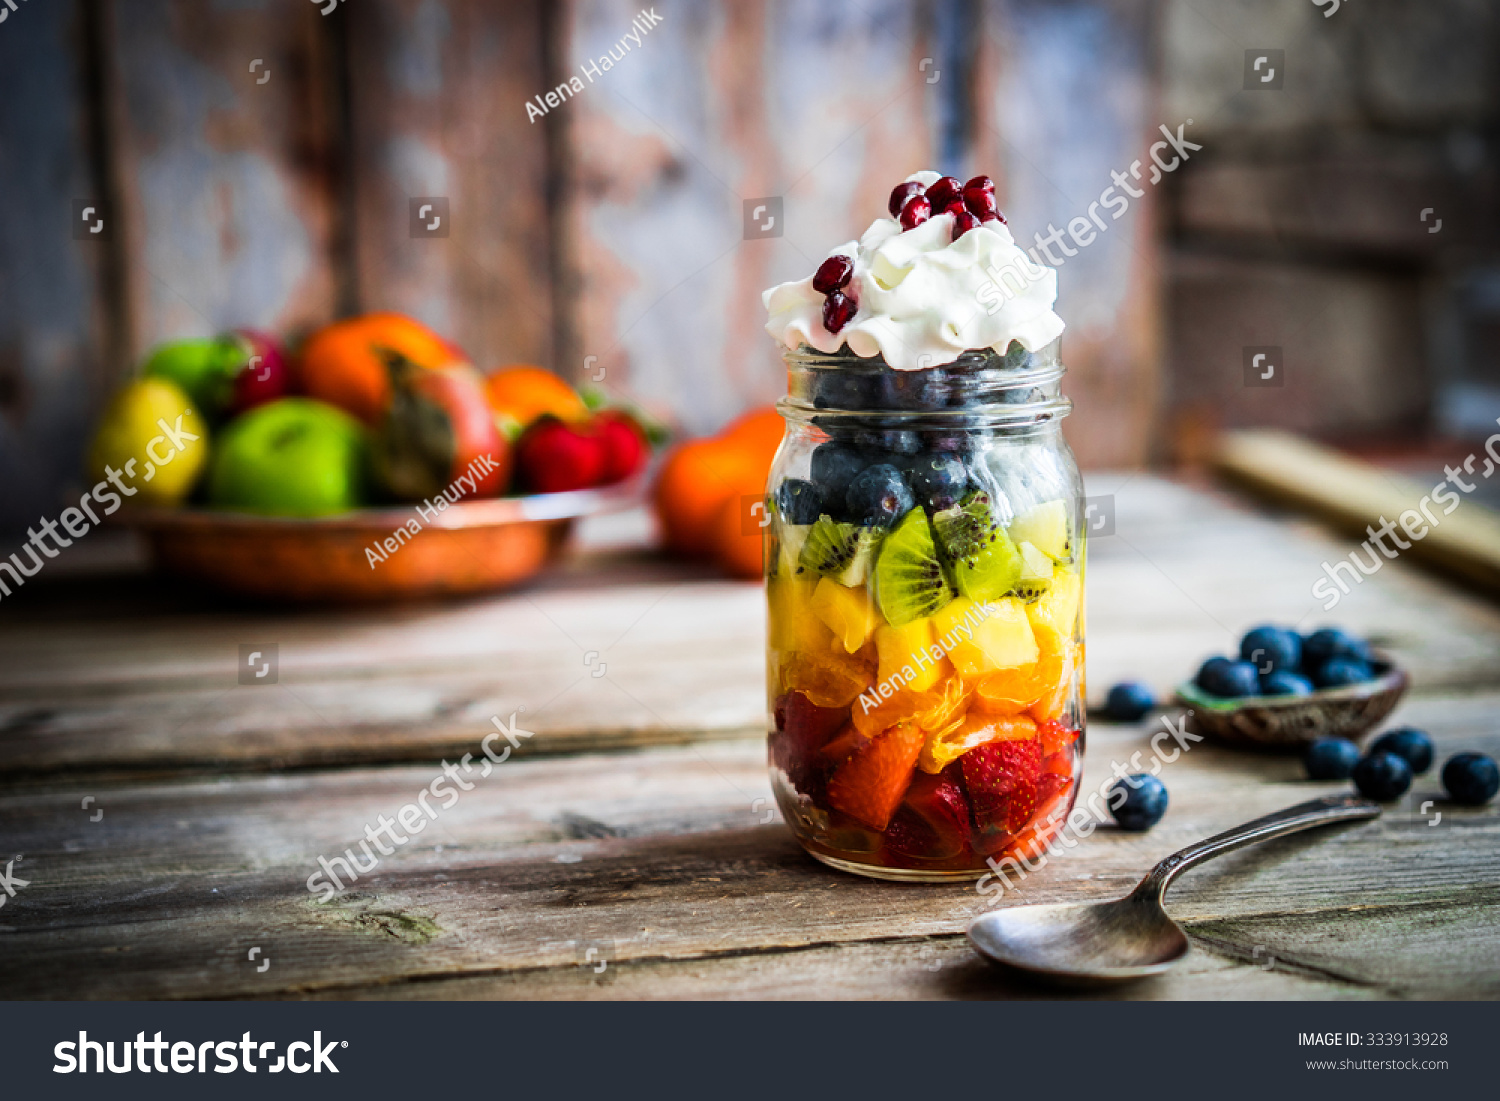 Colorful fruit salad in a jar on rustic wooden background #333913928